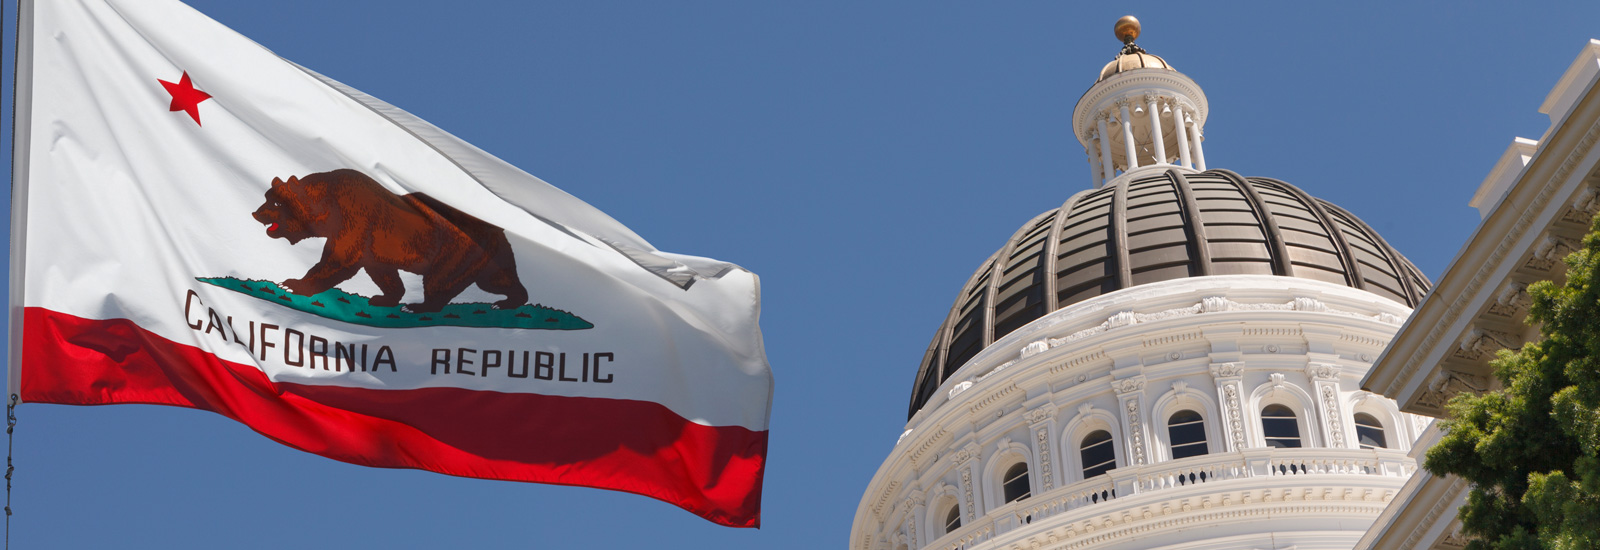 Capital Building and the California flag